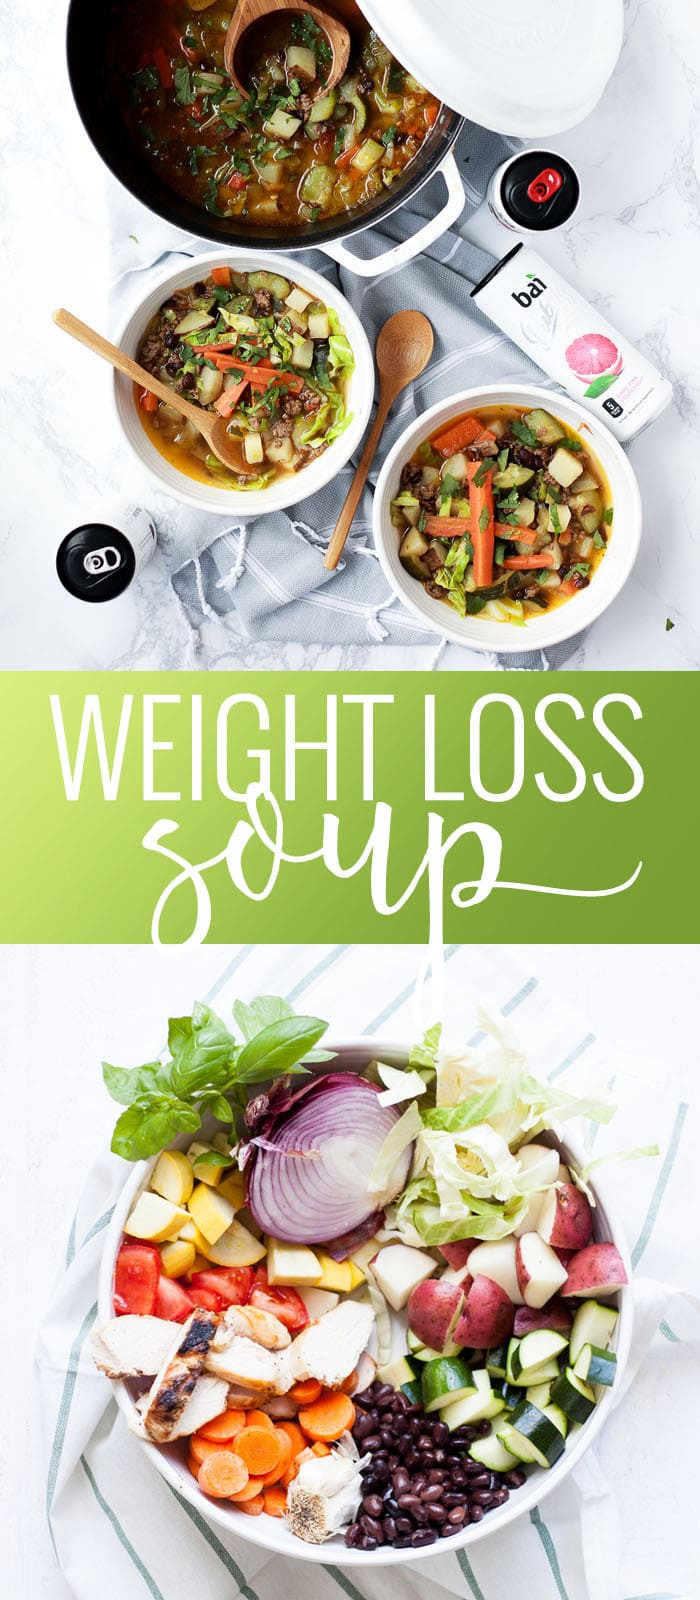 Healthy Soup Recipes For Weight Loss
 healthy soups for weight loss